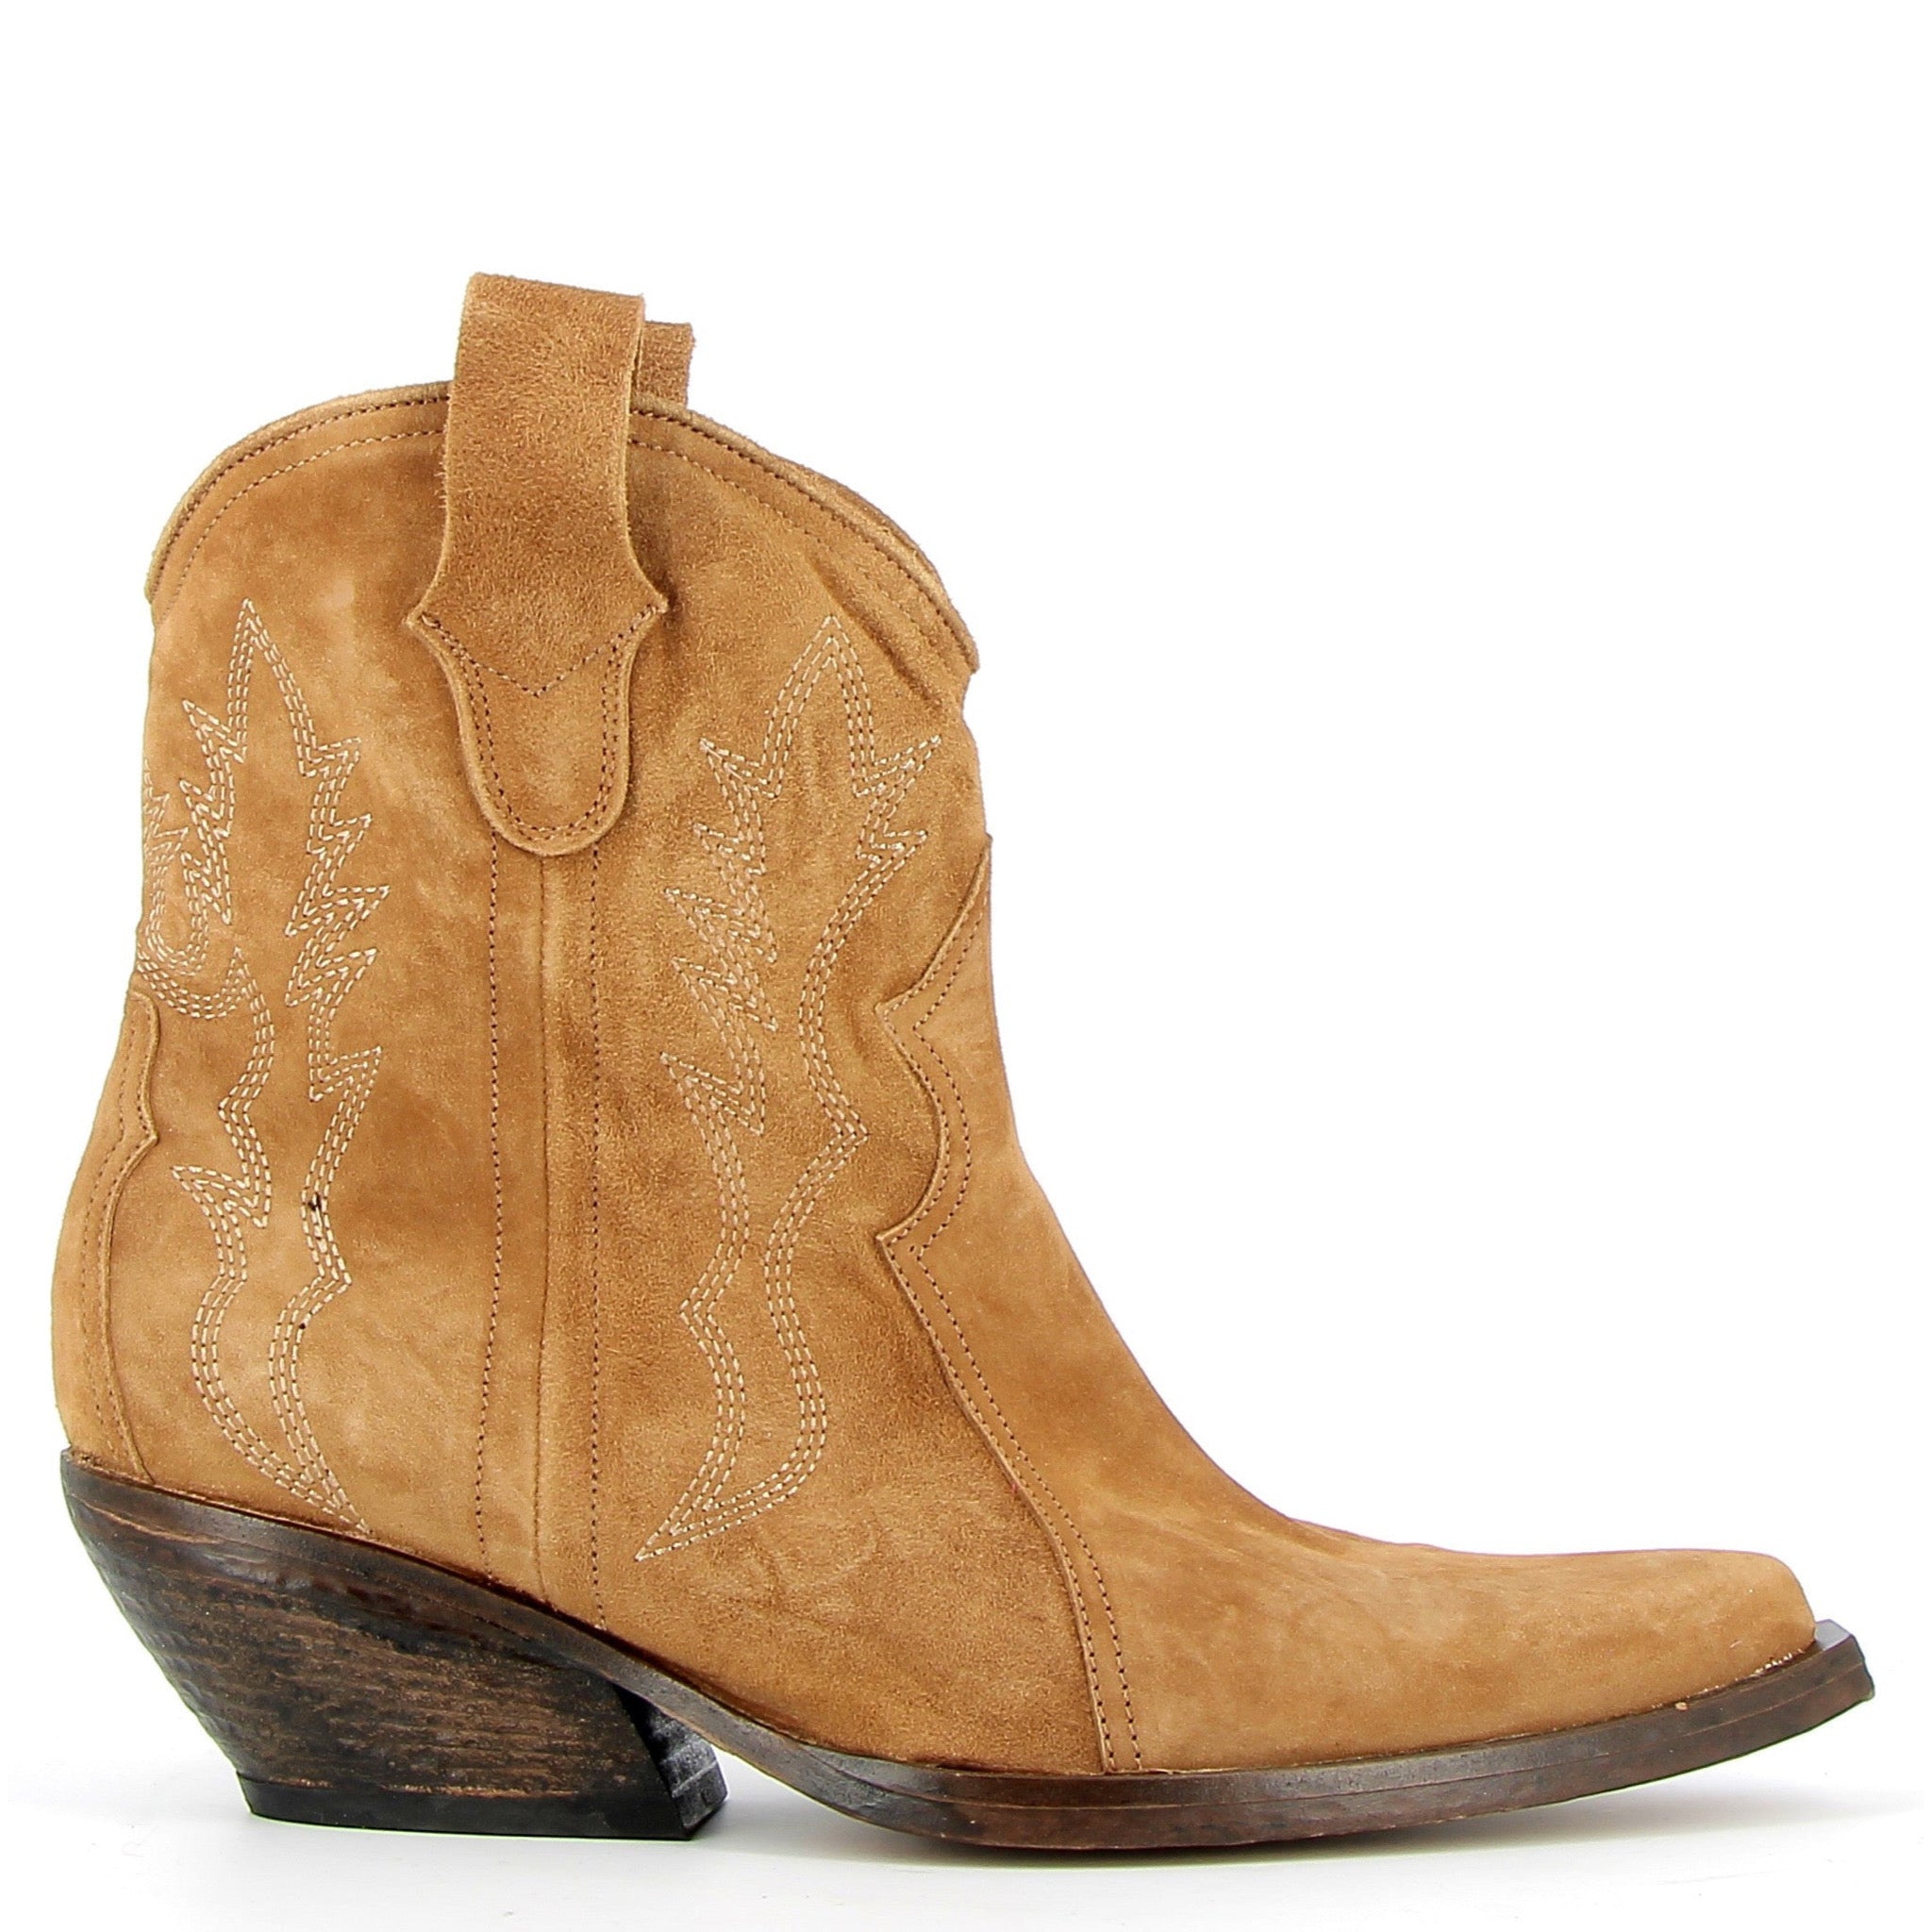 Light suede Texan ankle boot